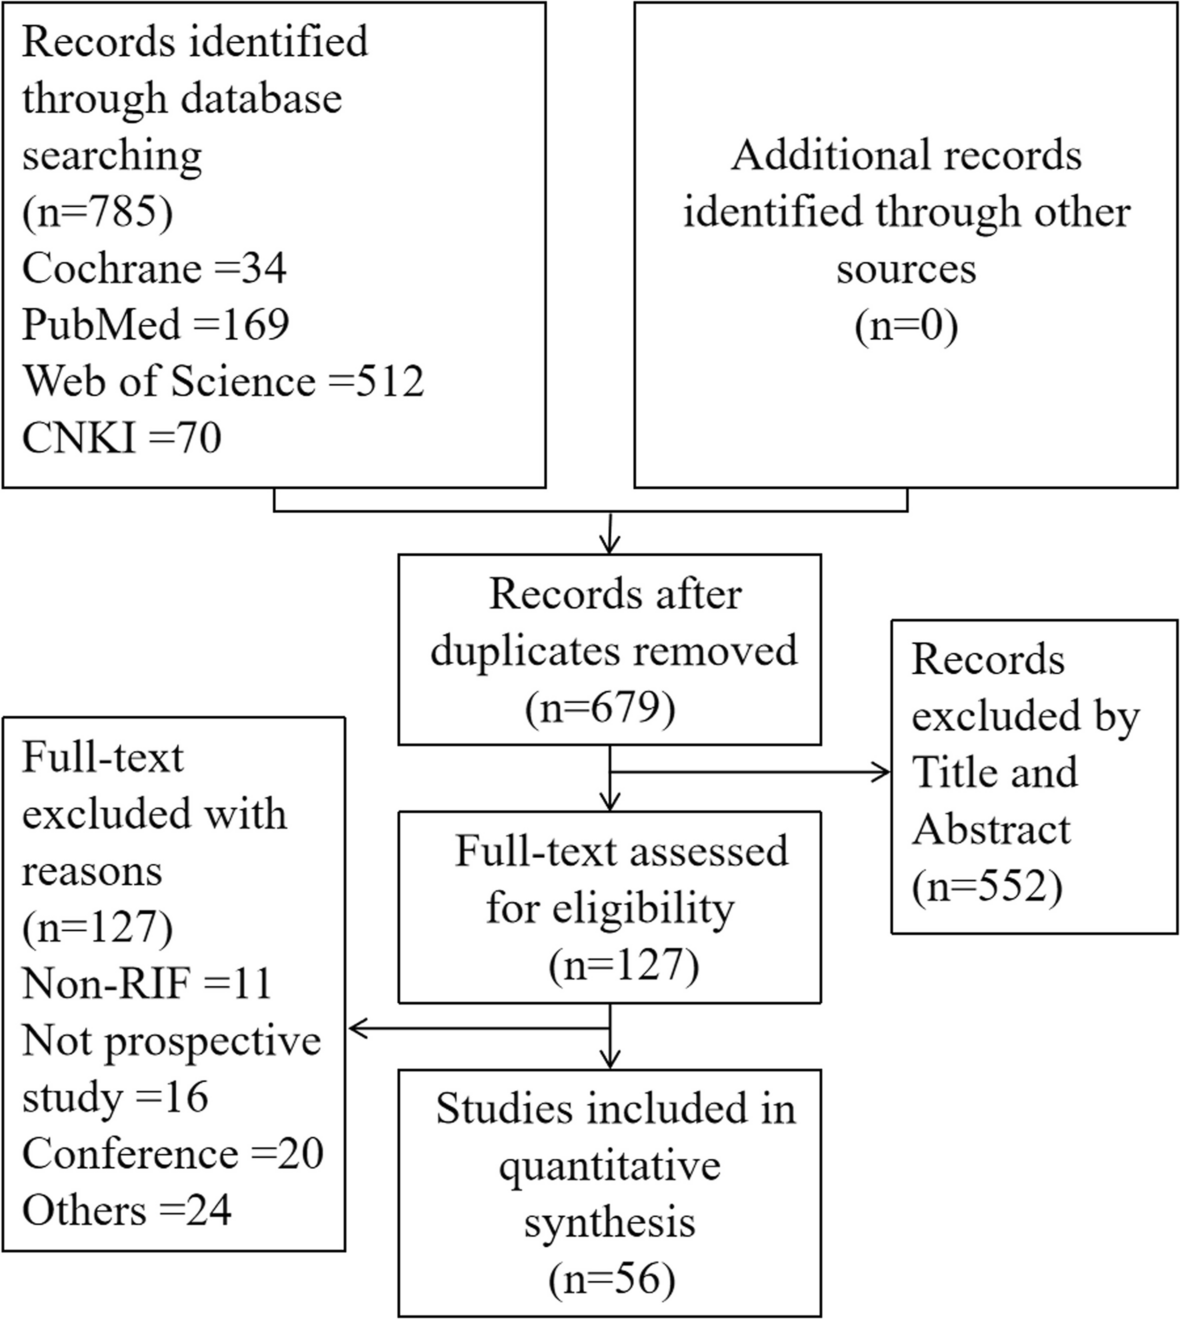 Uterine infusion strategies for infertile patients with recurrent implantation failure: a systematic review and network meta-analysis